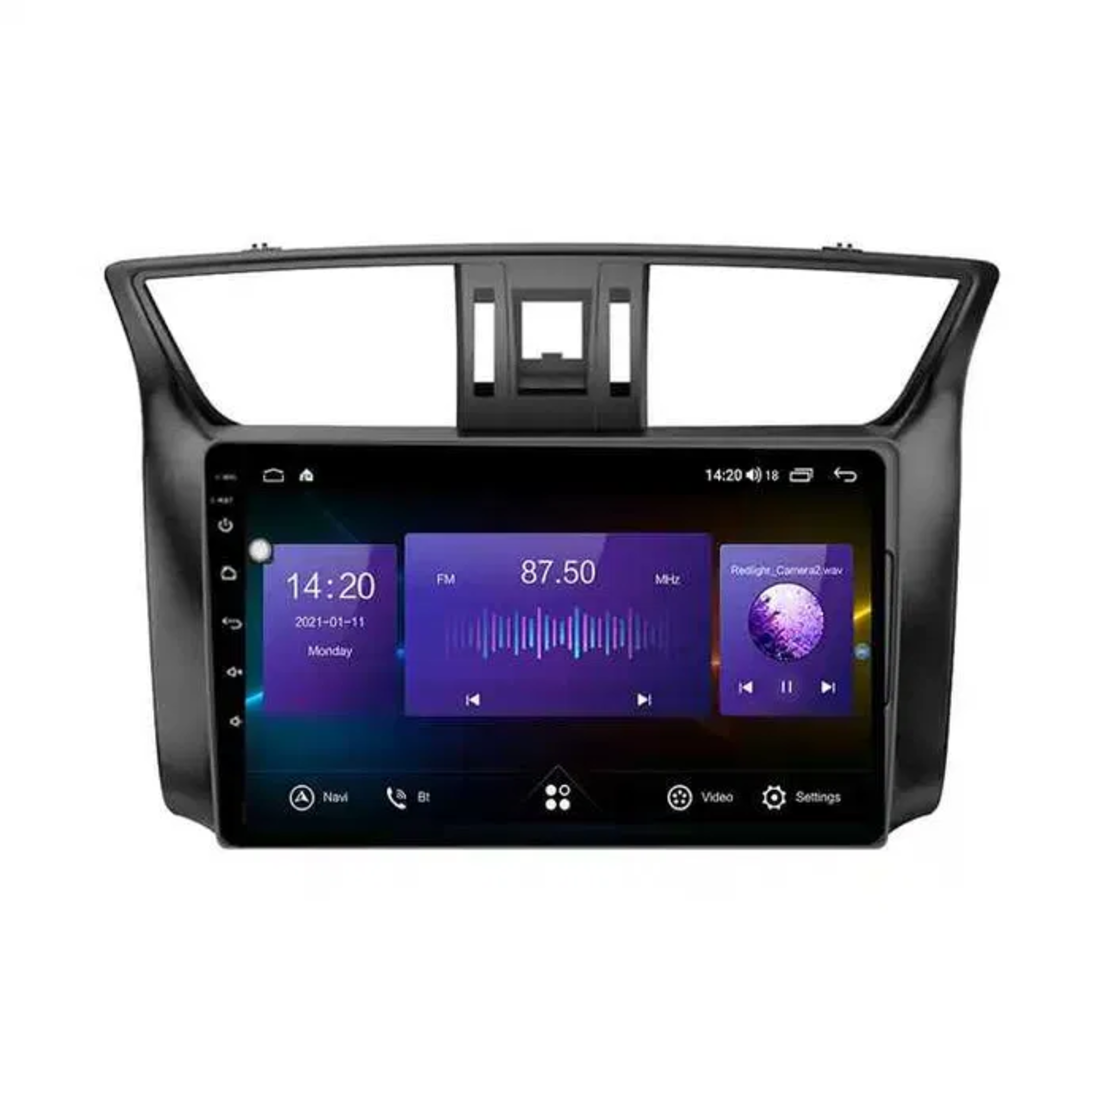 Nissan Sylphy 2012- 2017 Android Multimedia/Navigation